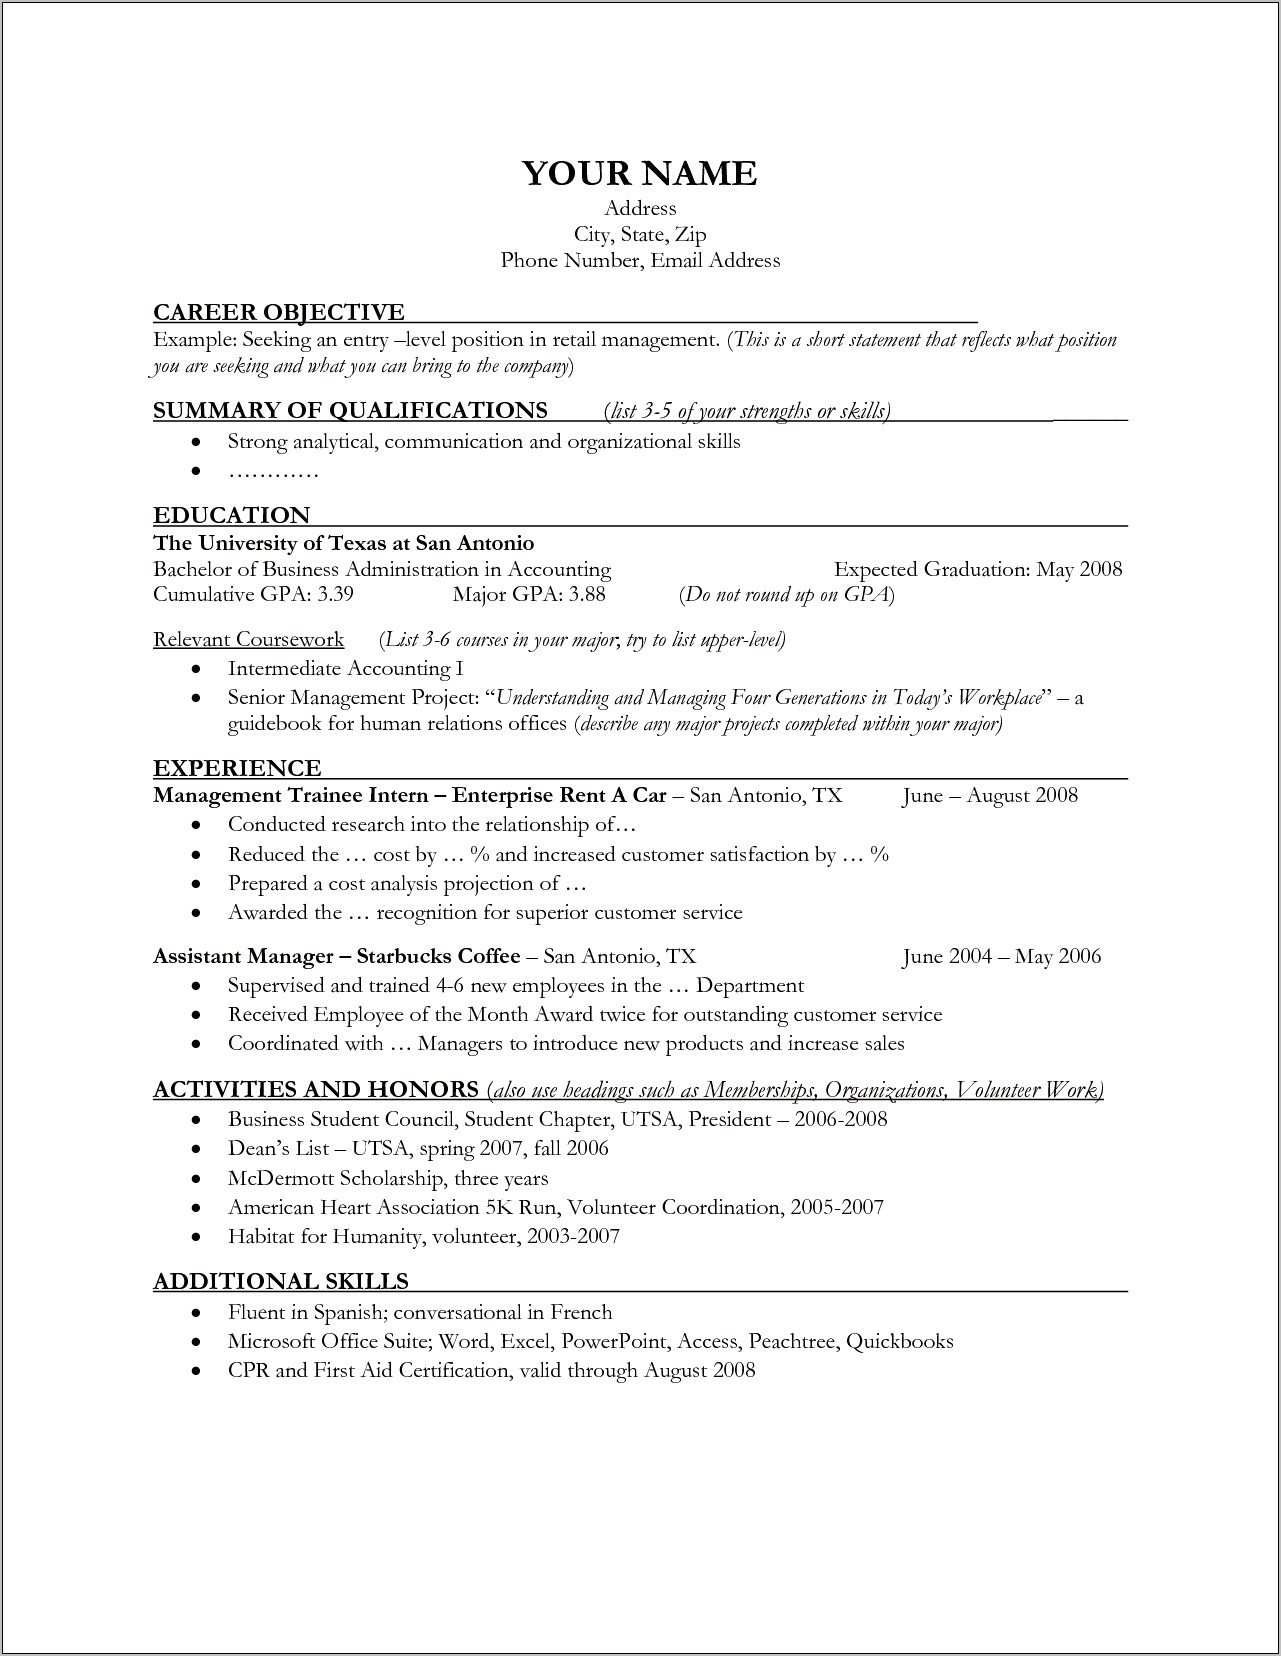 A Resume Example Of The Objective